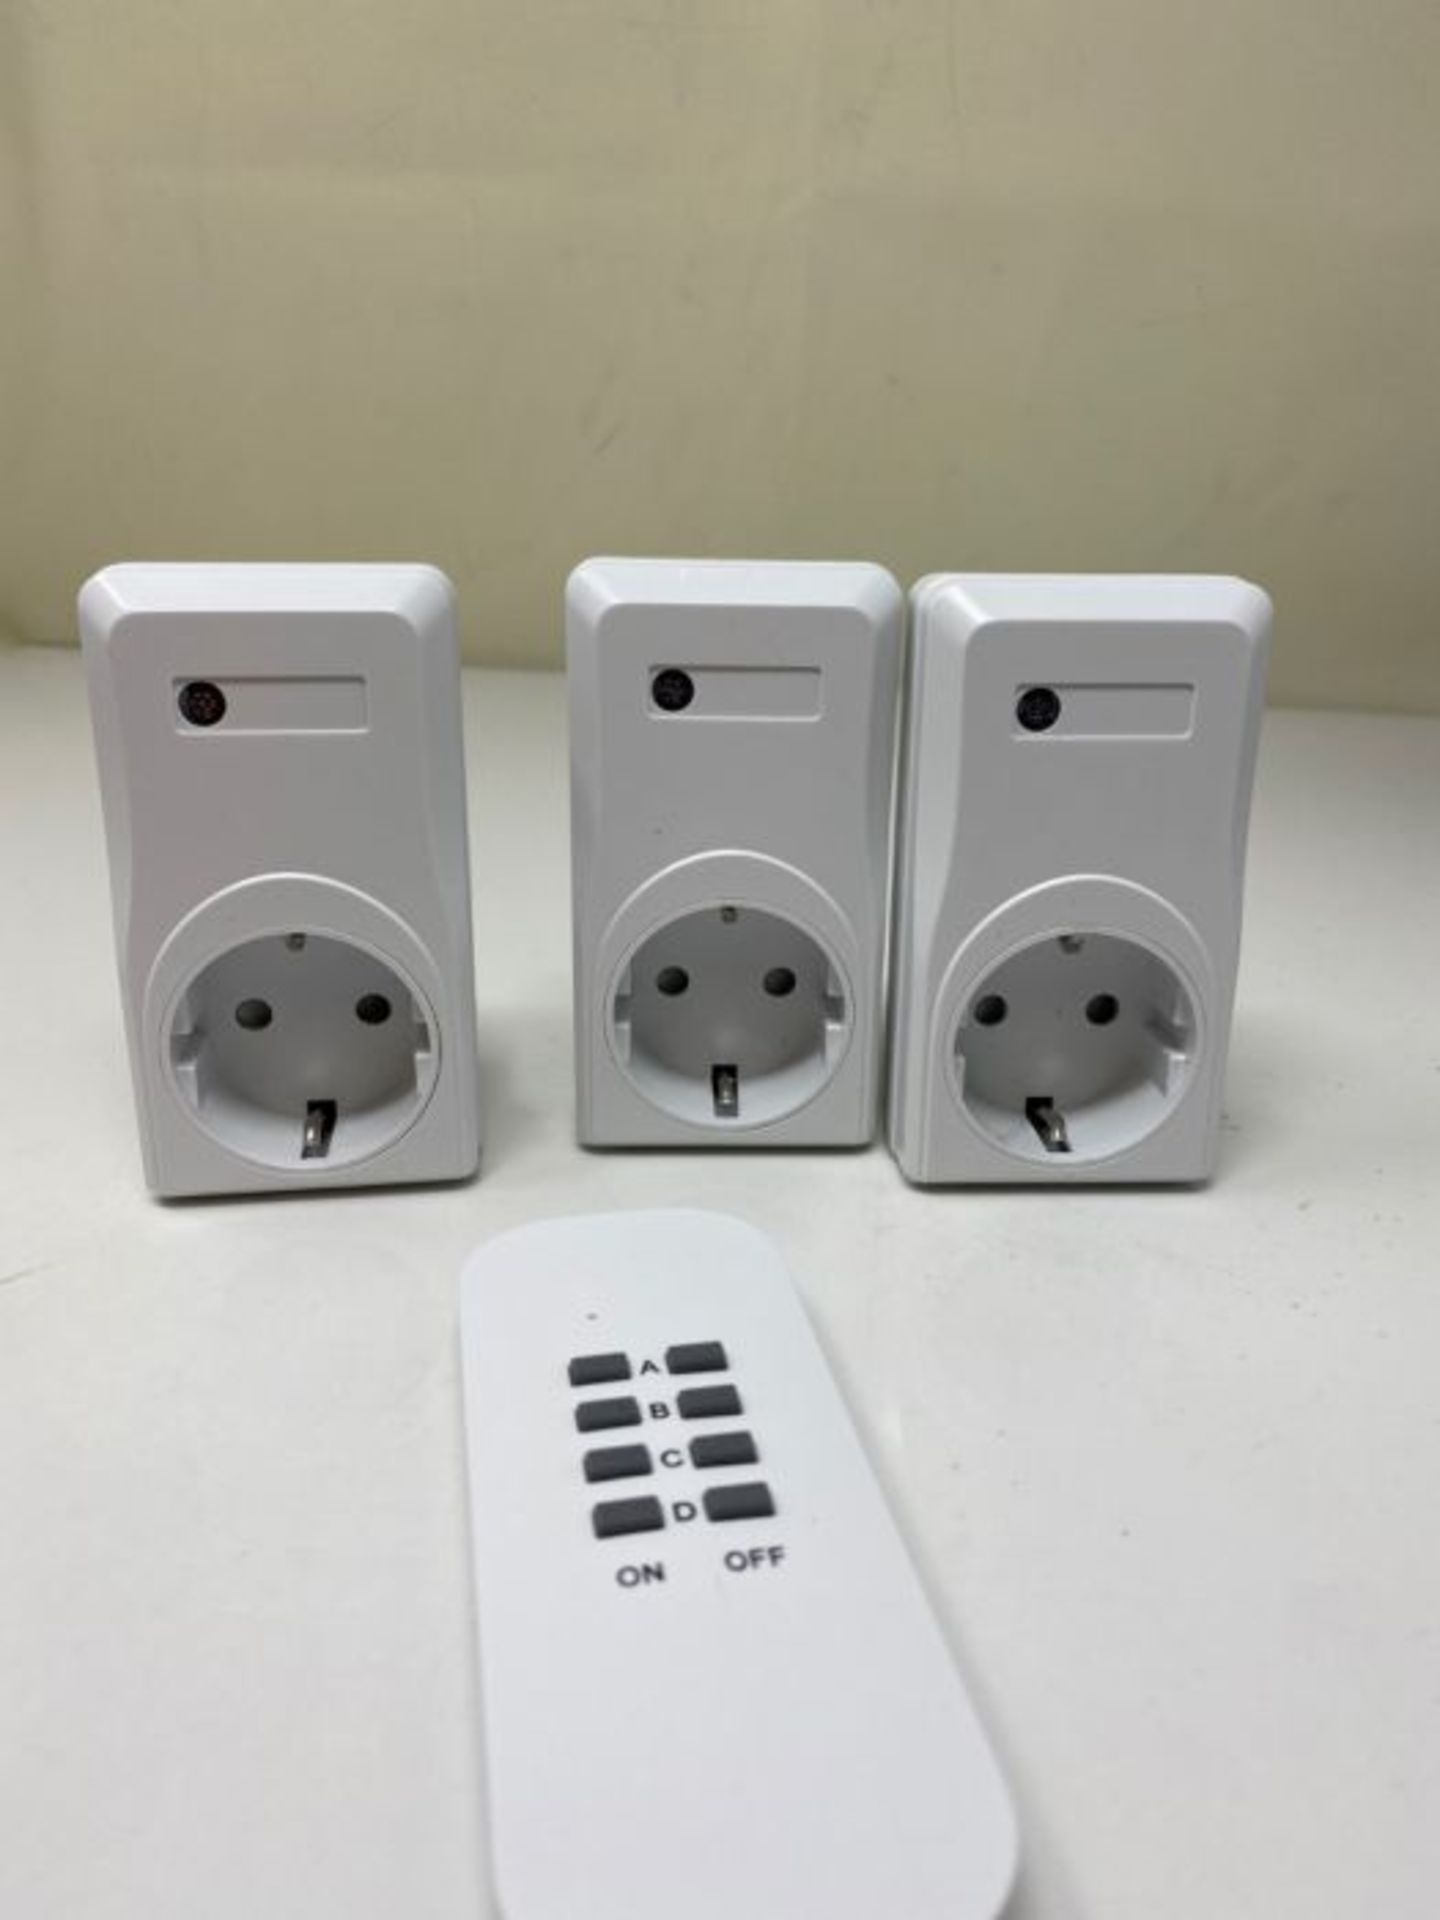 Unitec 48110 Wireless Remote Control Sockets Set - 3 Sockets with 1 Remote, White - Image 2 of 2